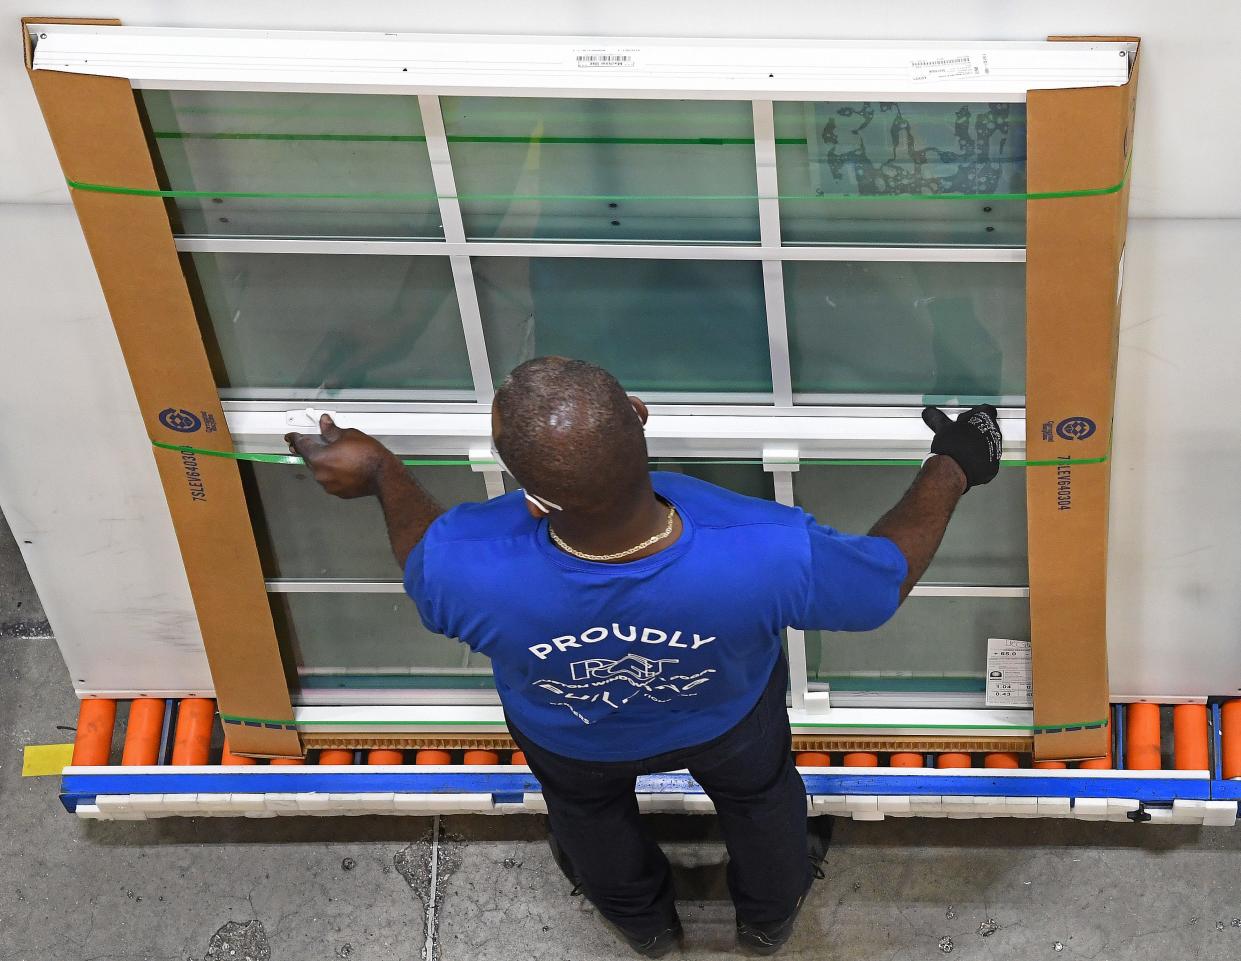 A PGT employee inspecting some single-hung windows. PGT Innovations, the largest employer in Sarasota County and manufacturer of weather-resistant windows and doors, has announced the production of "Diamond Glass" at its Venice headquarters.